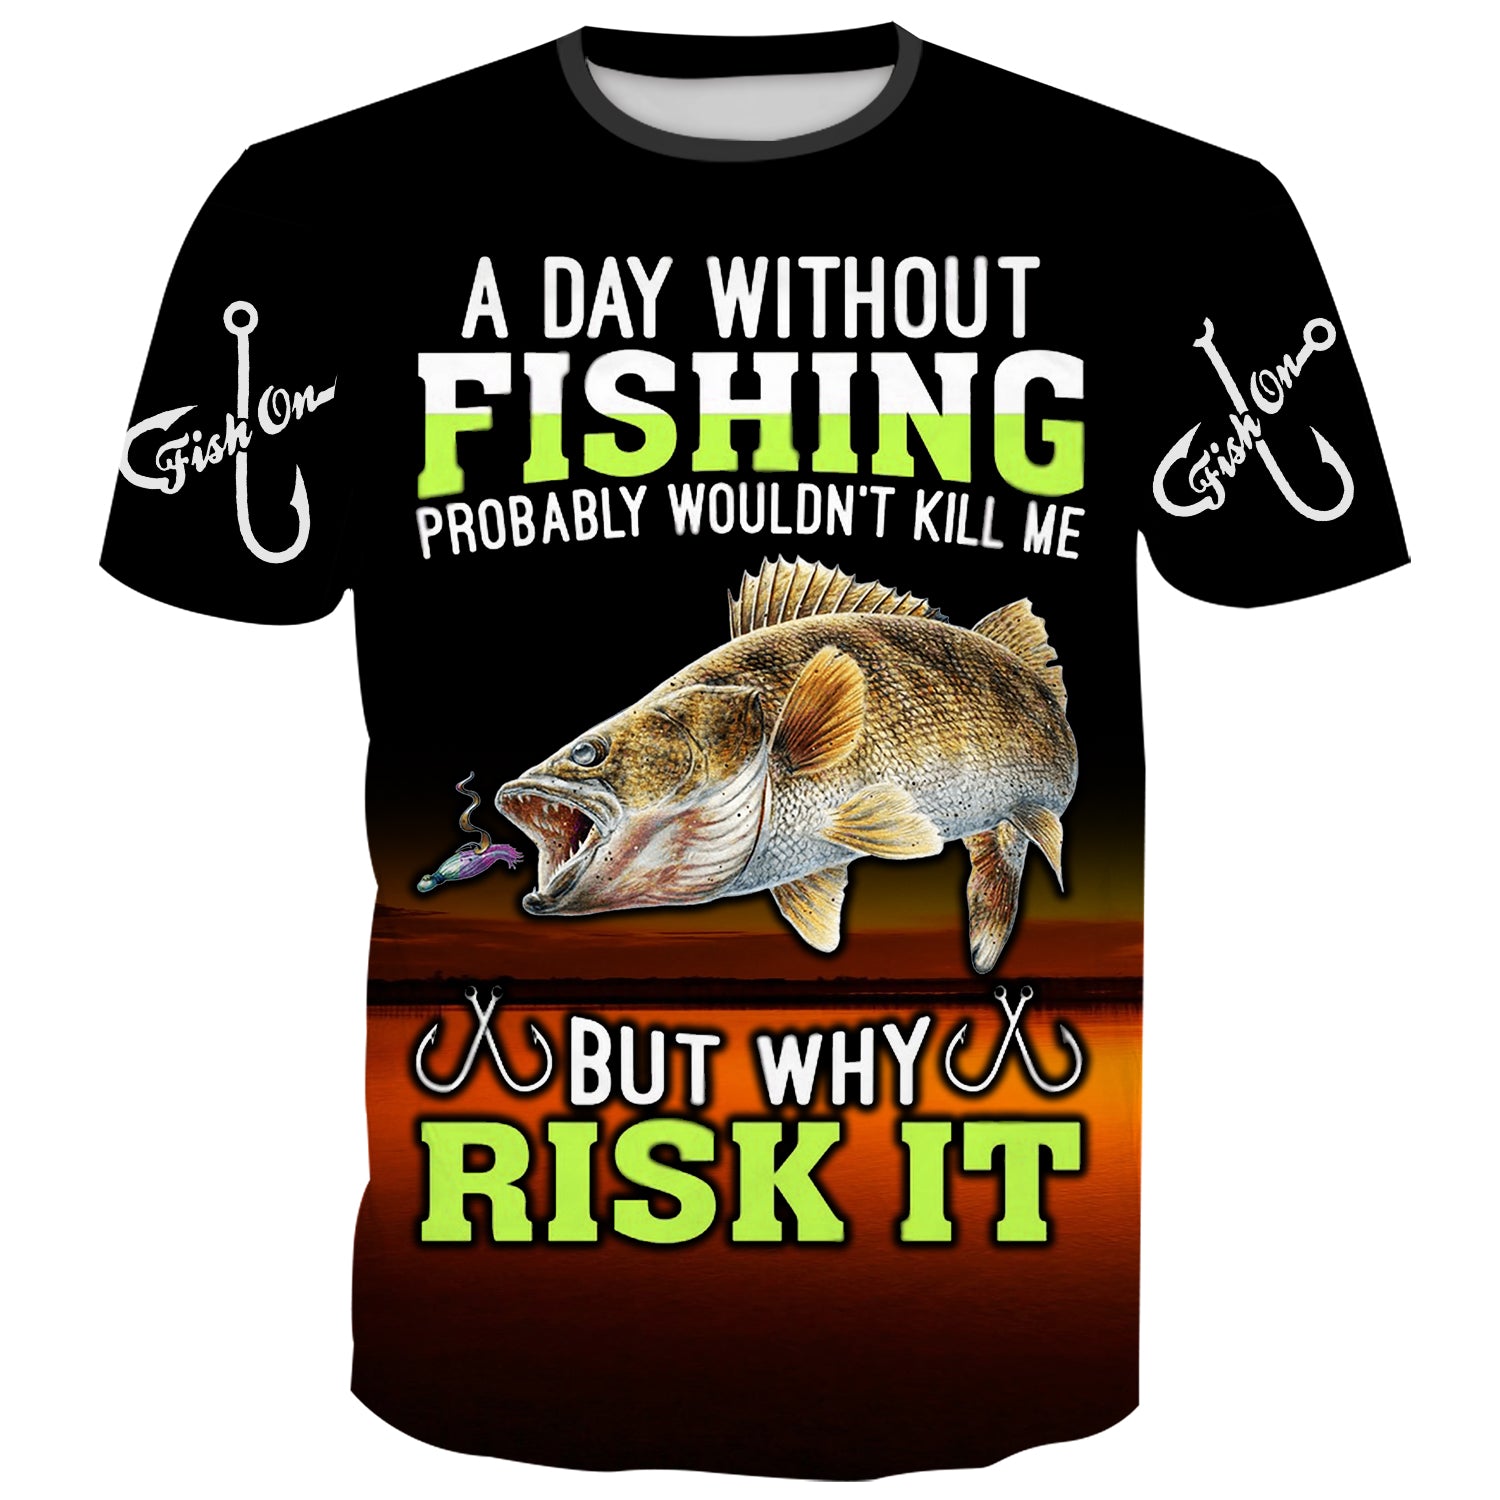 A Day without Fishing won't kill me, but why risk it - T-Shirt